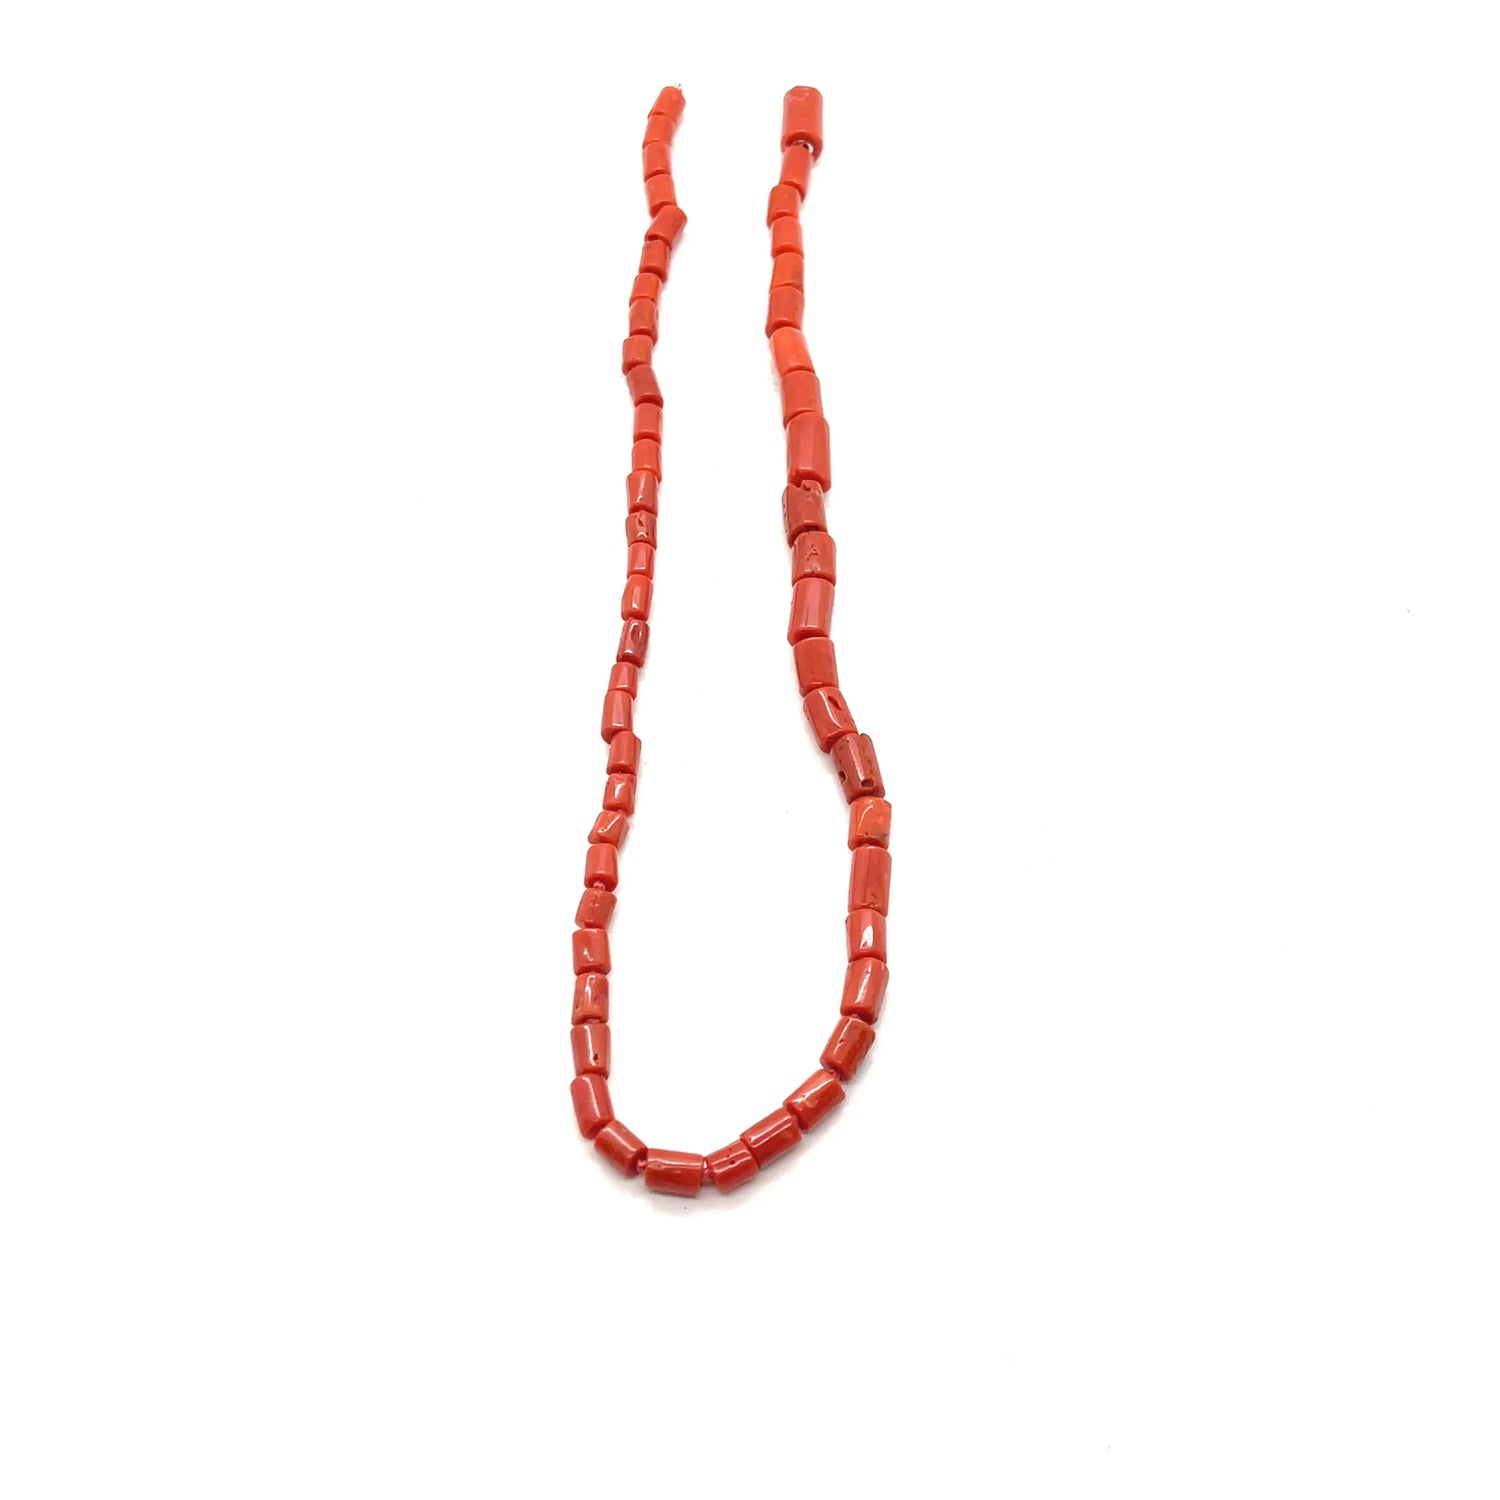 Mediterranean Red Coral Beads with Male Vario Clasp  Length: 18 inches  Designed by Alex Sepkus and made in NY